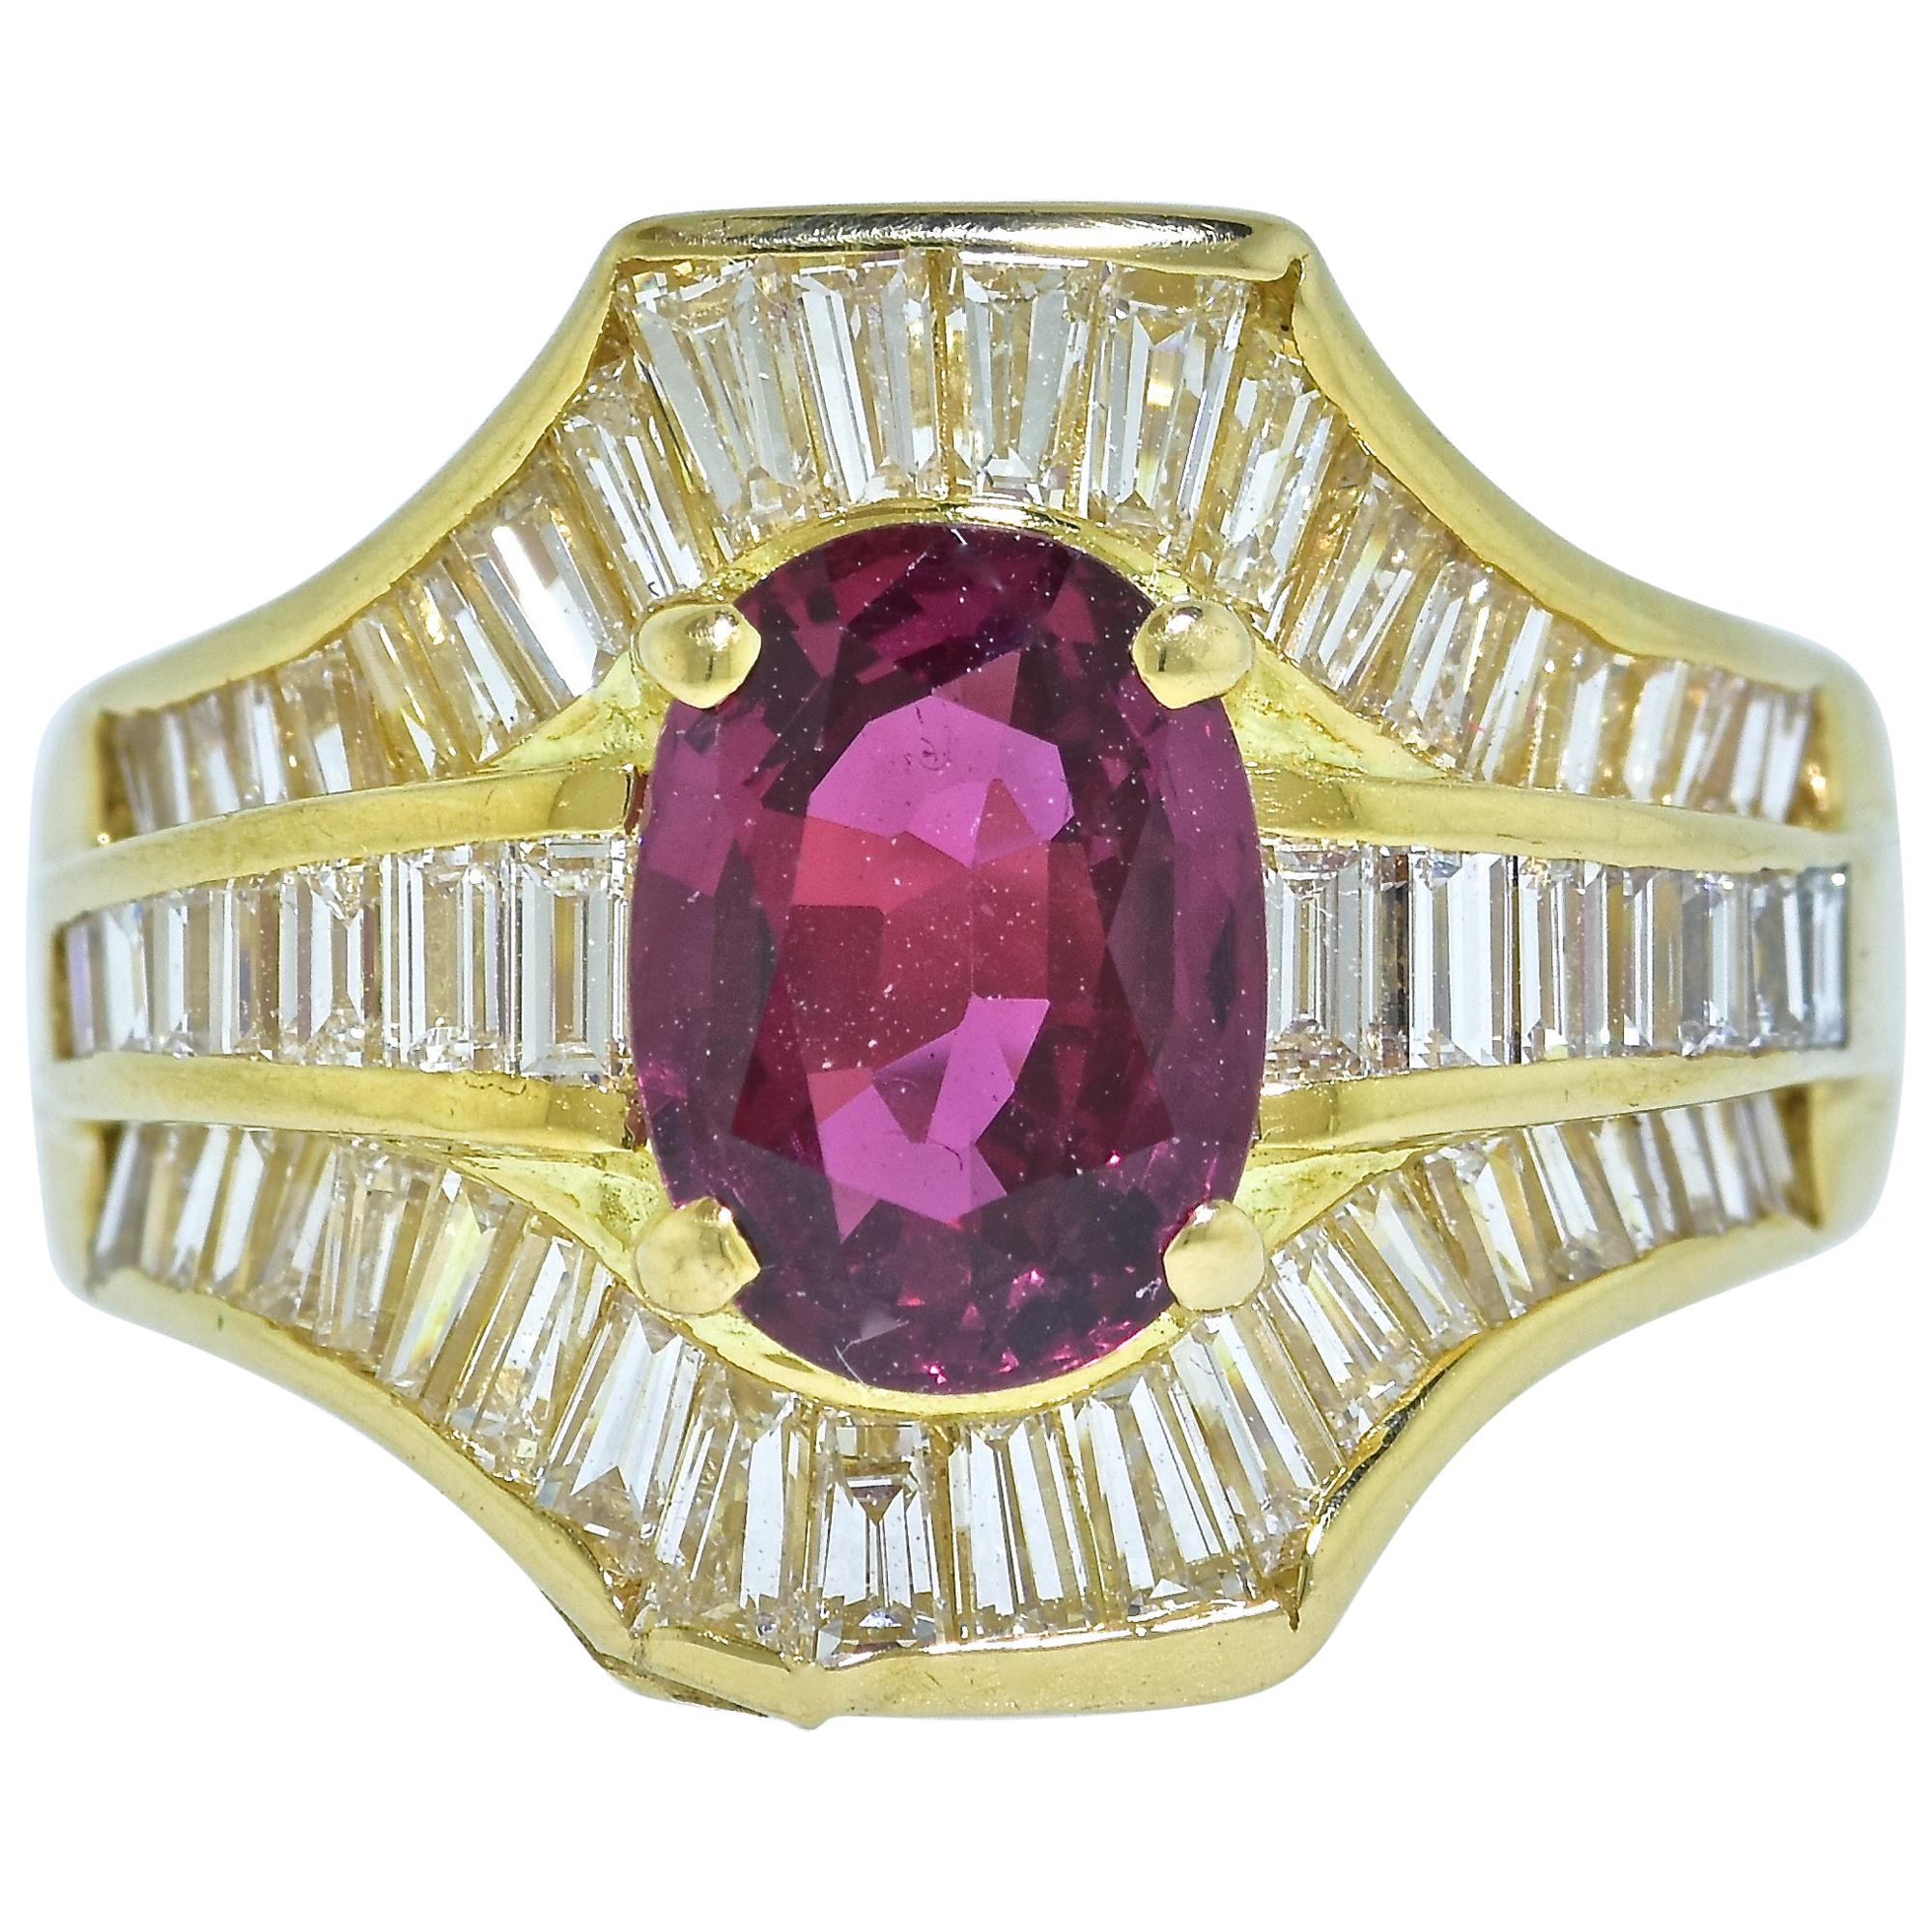 Contemporary Diamond and Ruby Ring in 18K Yellow Gold